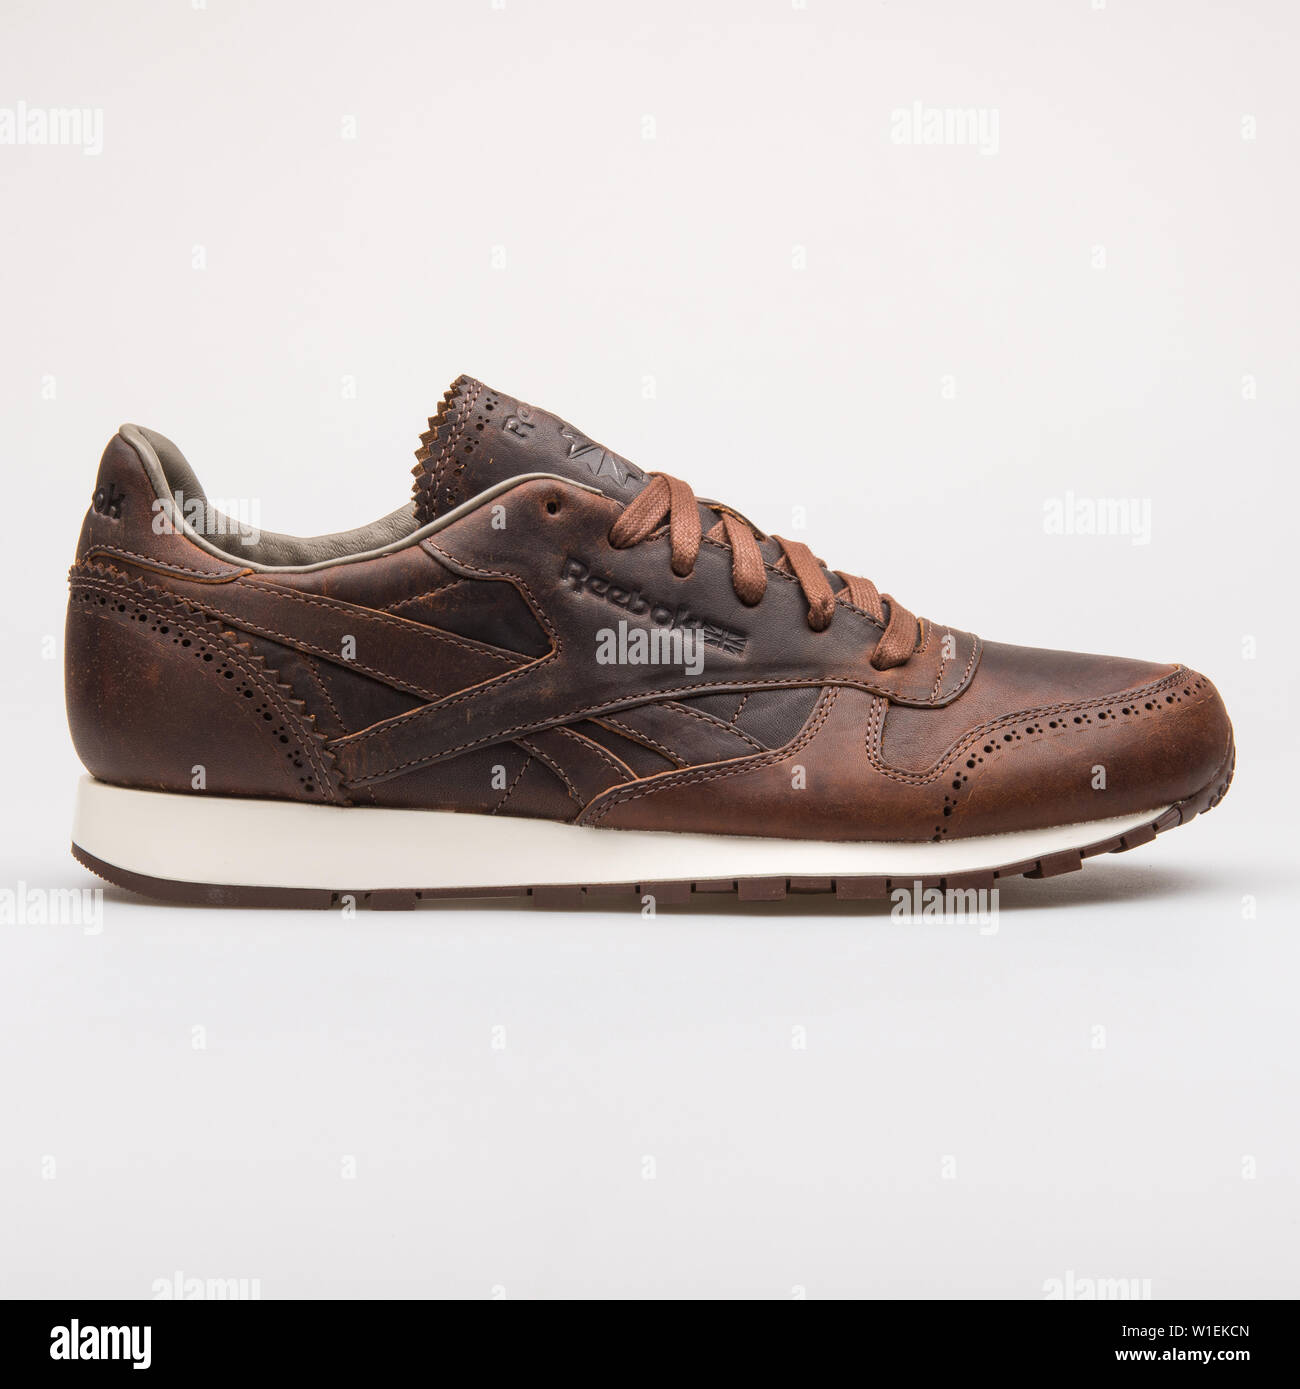 Lurk Descriptive ball VIENNA, AUSTRIA - AUGUST 28, 2017: Reebok Classic Leather Lux Horween brown  sneaker on white background Stock Photo - Alamy